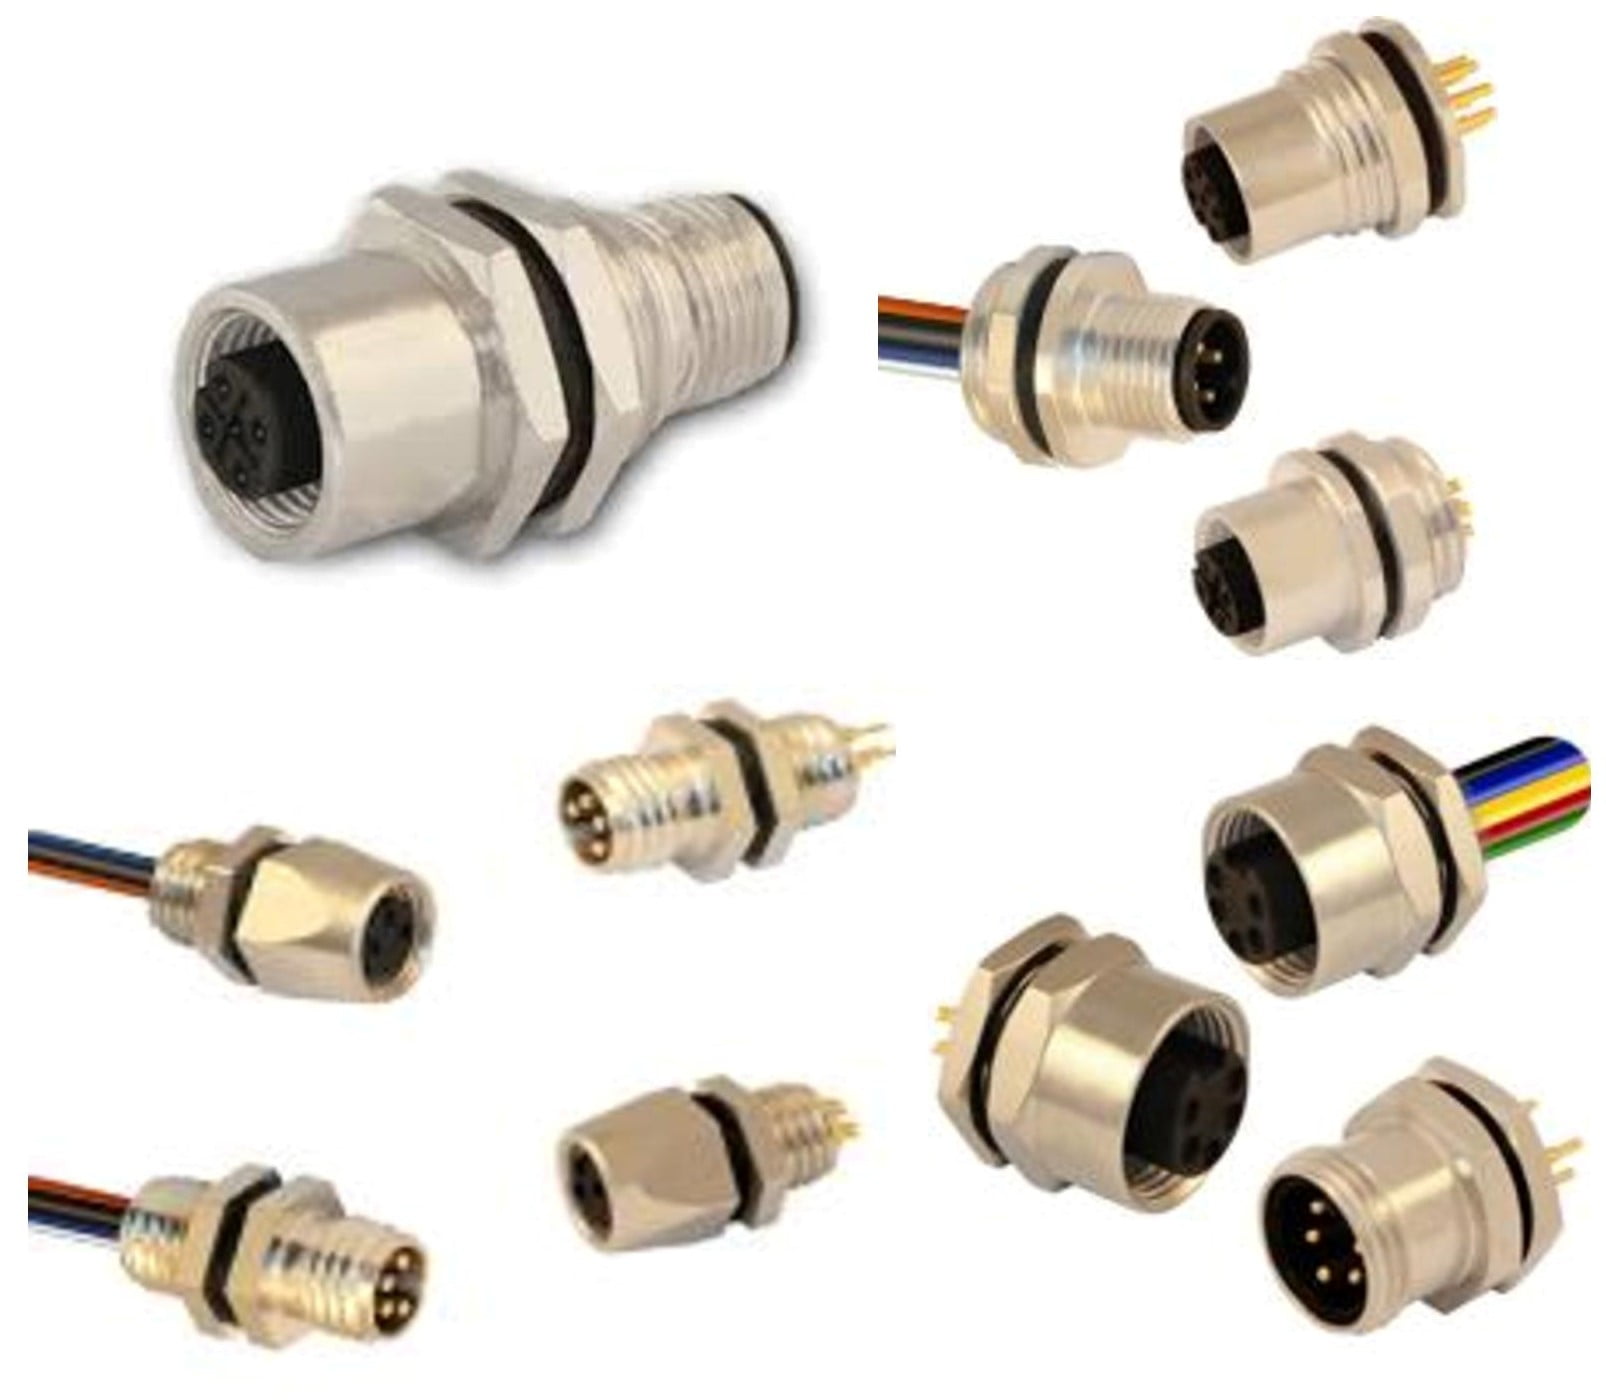 Industrial Connectors - Norstat Safety, Automation & Connectivity Solutions